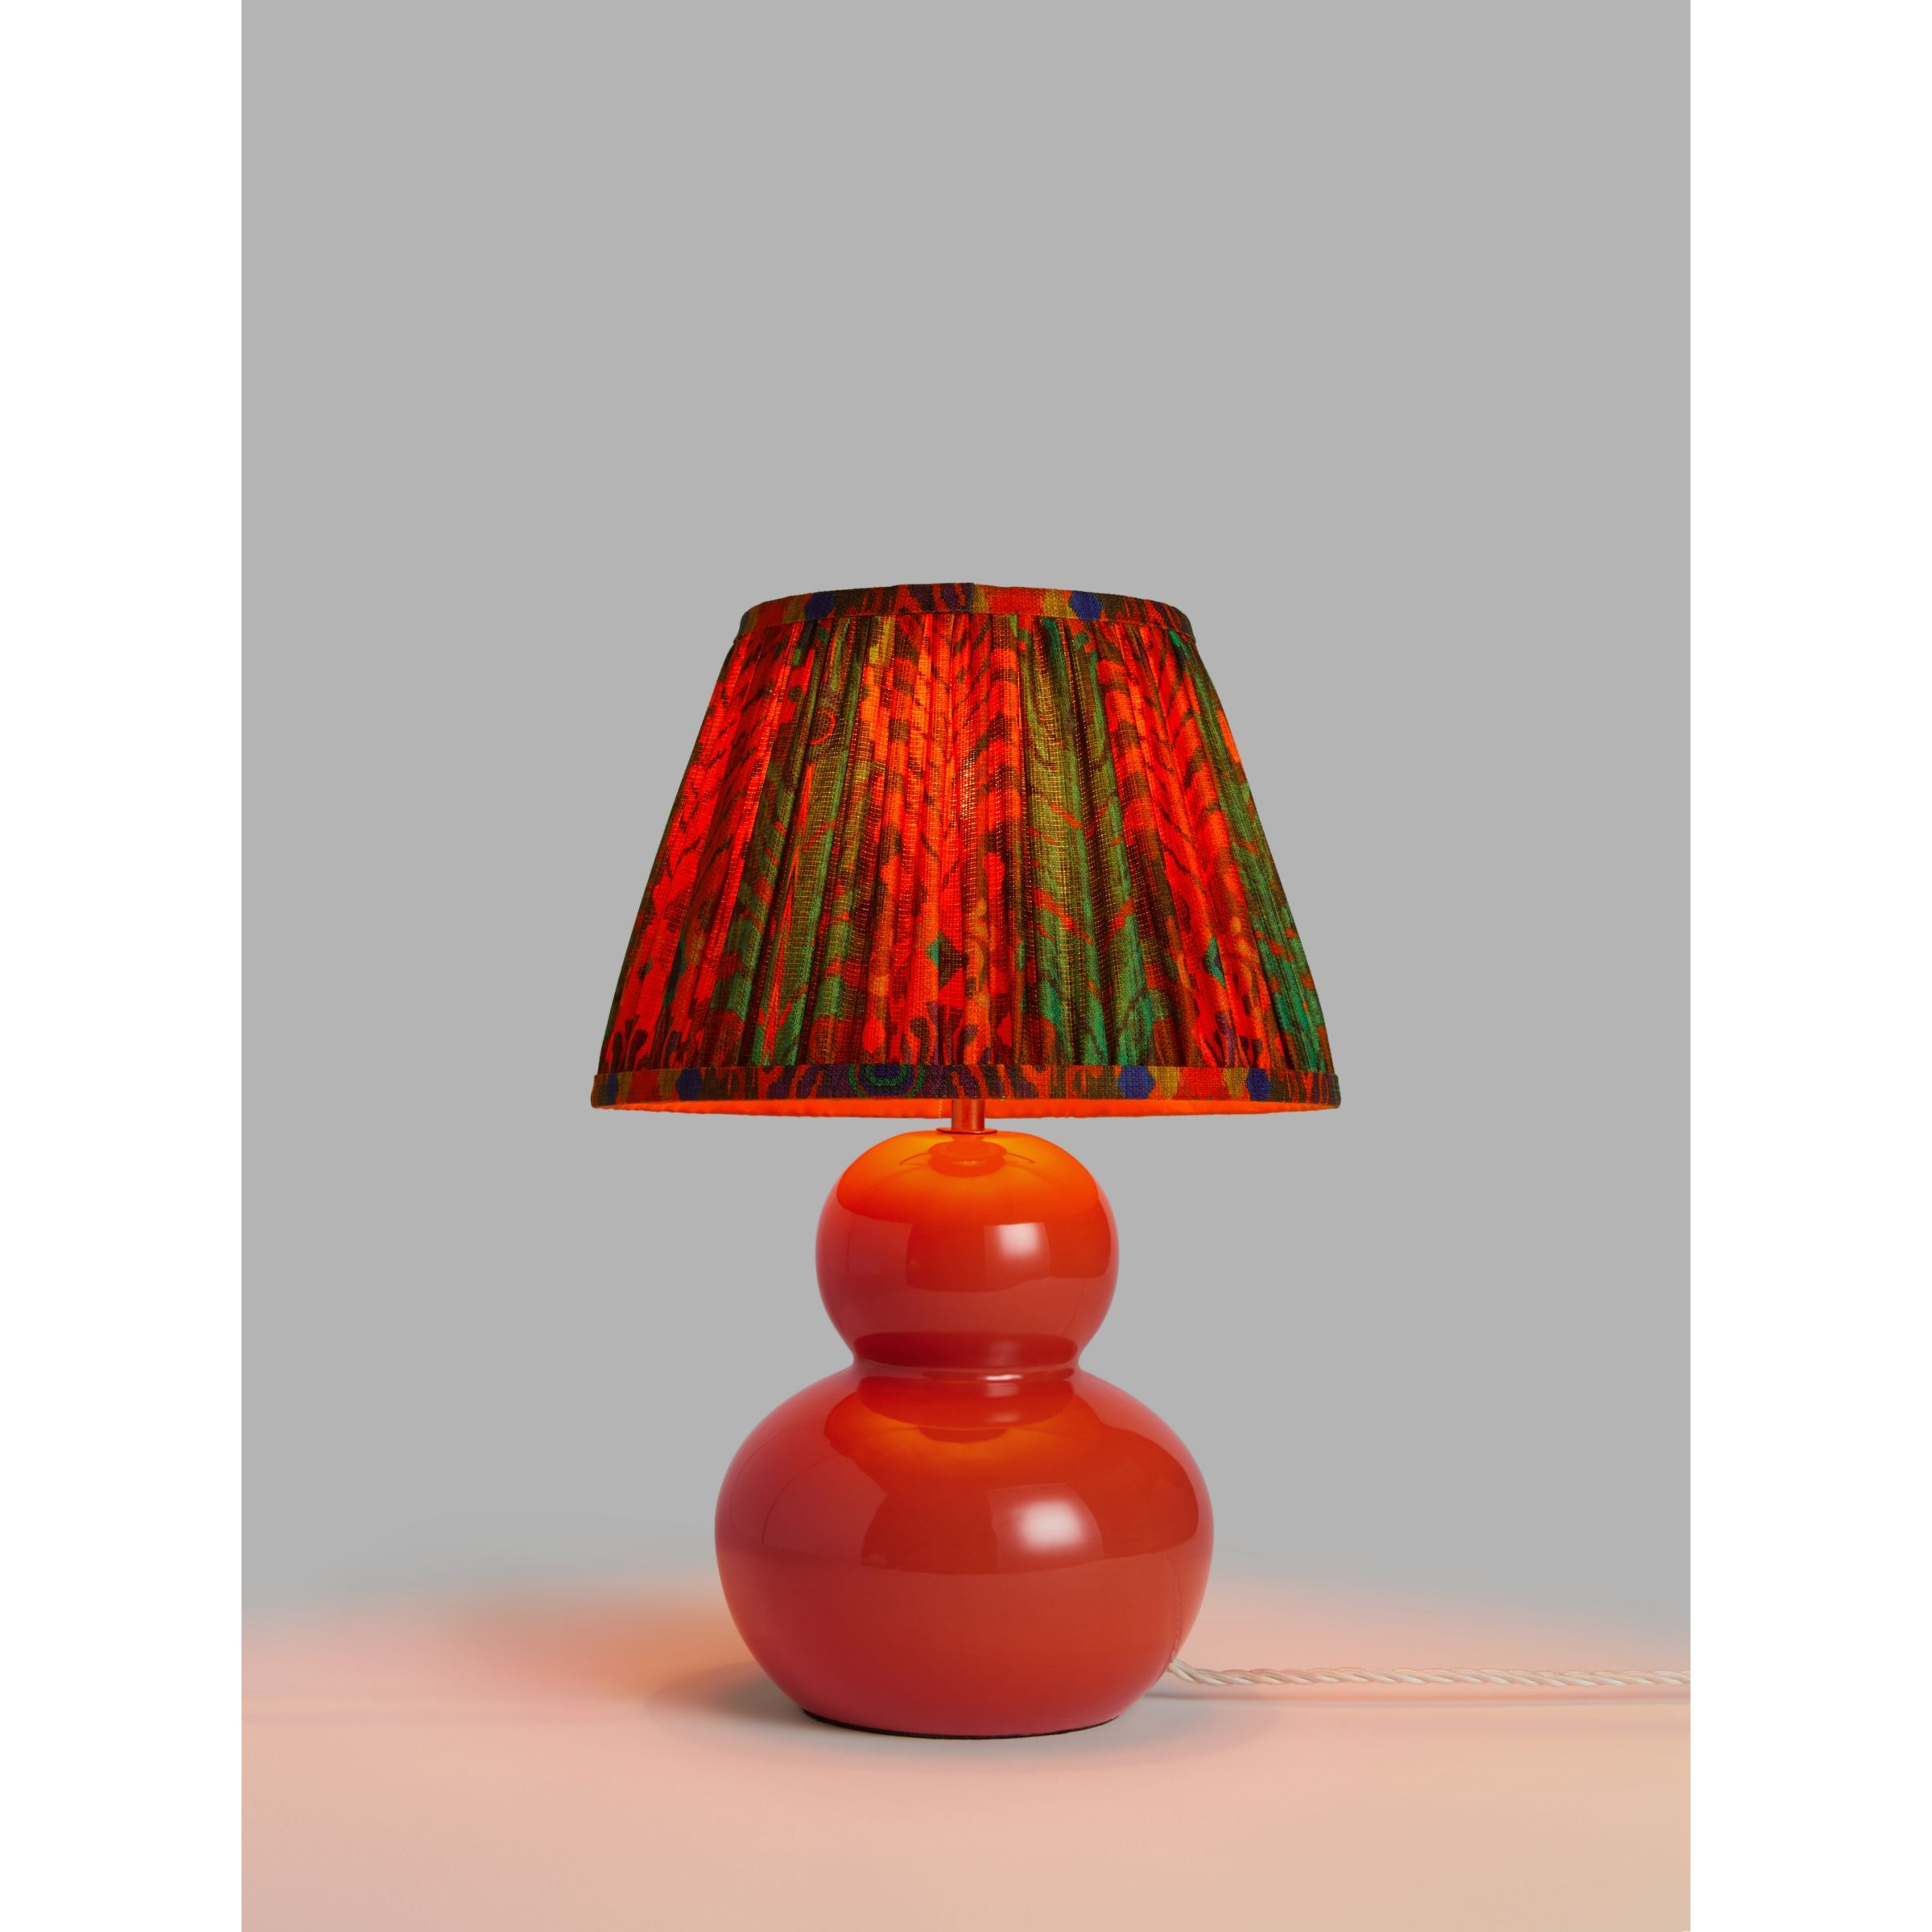 John Lewis + Matthew Williamson Curved Ceramic Lamp Base and Peacock Tapered Lampshade, Terracotta/Red - image 1